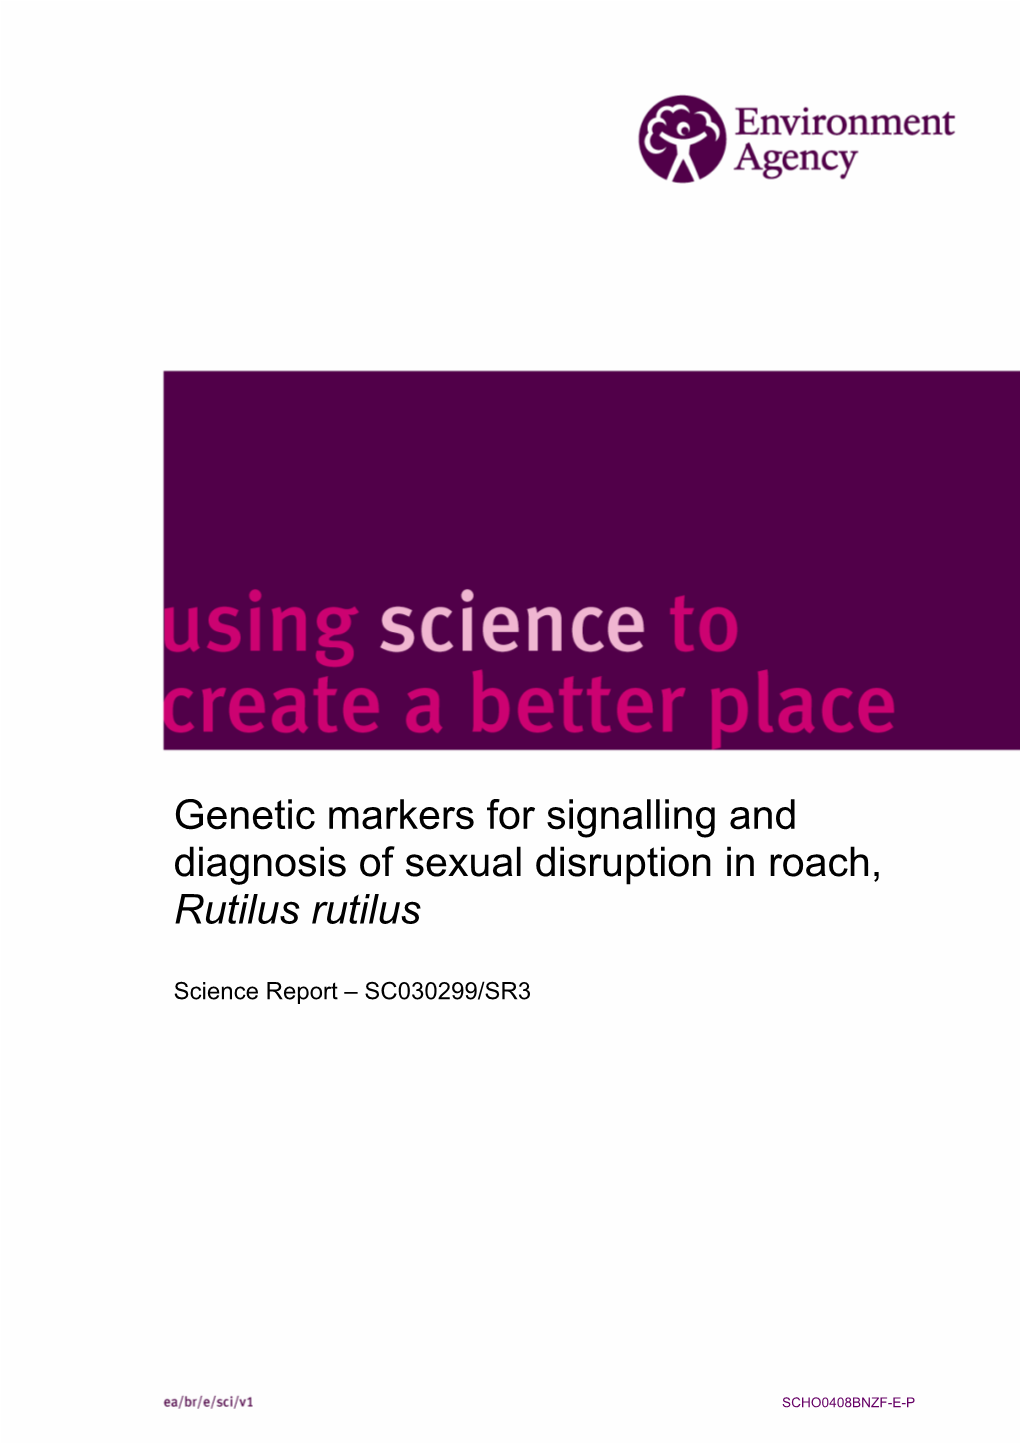 Genetic Markers for Signalling and Diagnosis of Sexual Disruption in Roach, Rutilus Rutilus